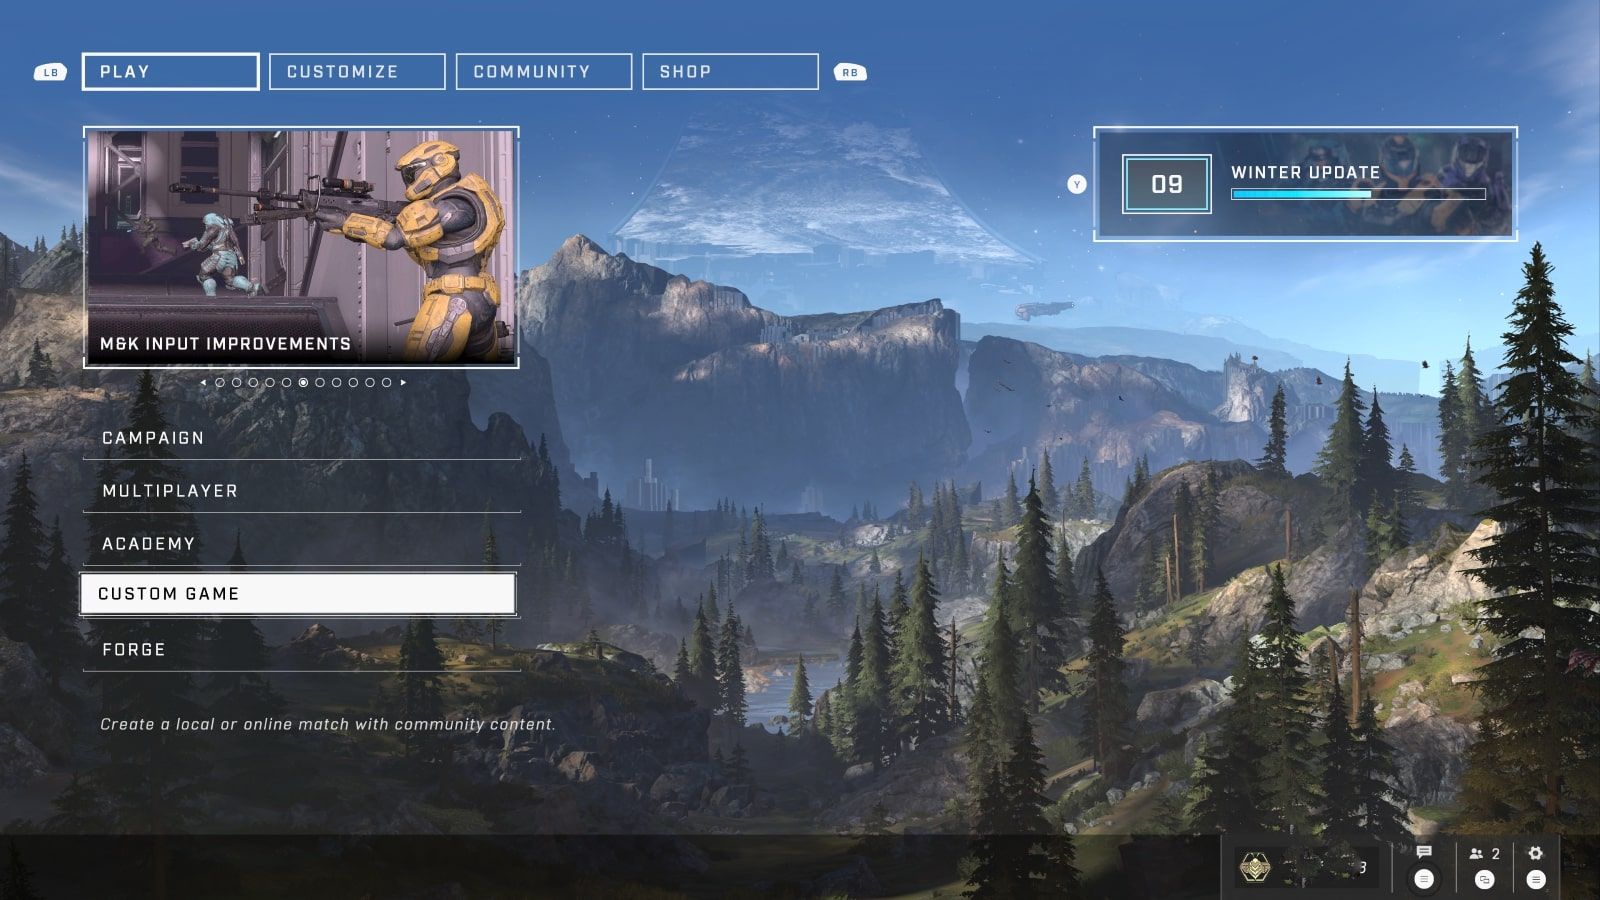 A screenshot of the Halo Infinite main menu with the Play options highlighted